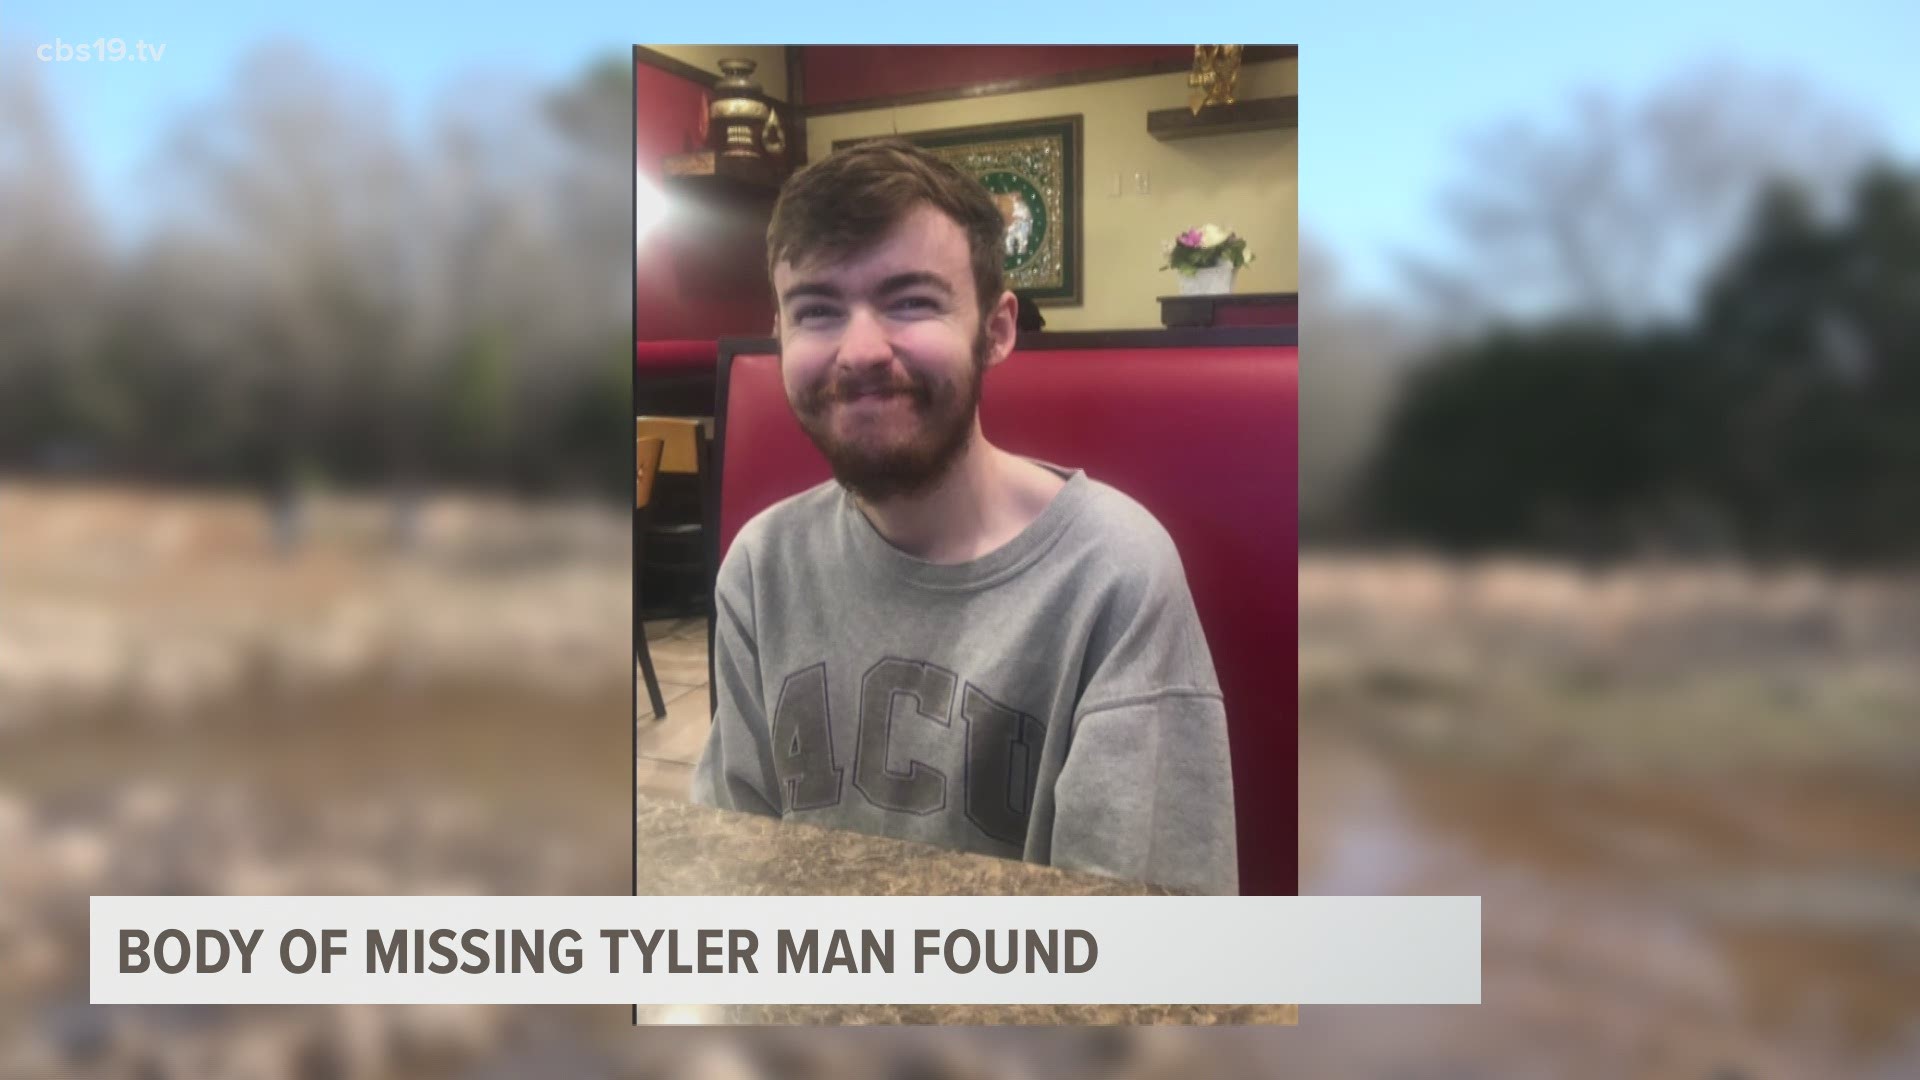 Officials have located the body of a Tyler man who has been missing since Wednesday, Jan. 6.